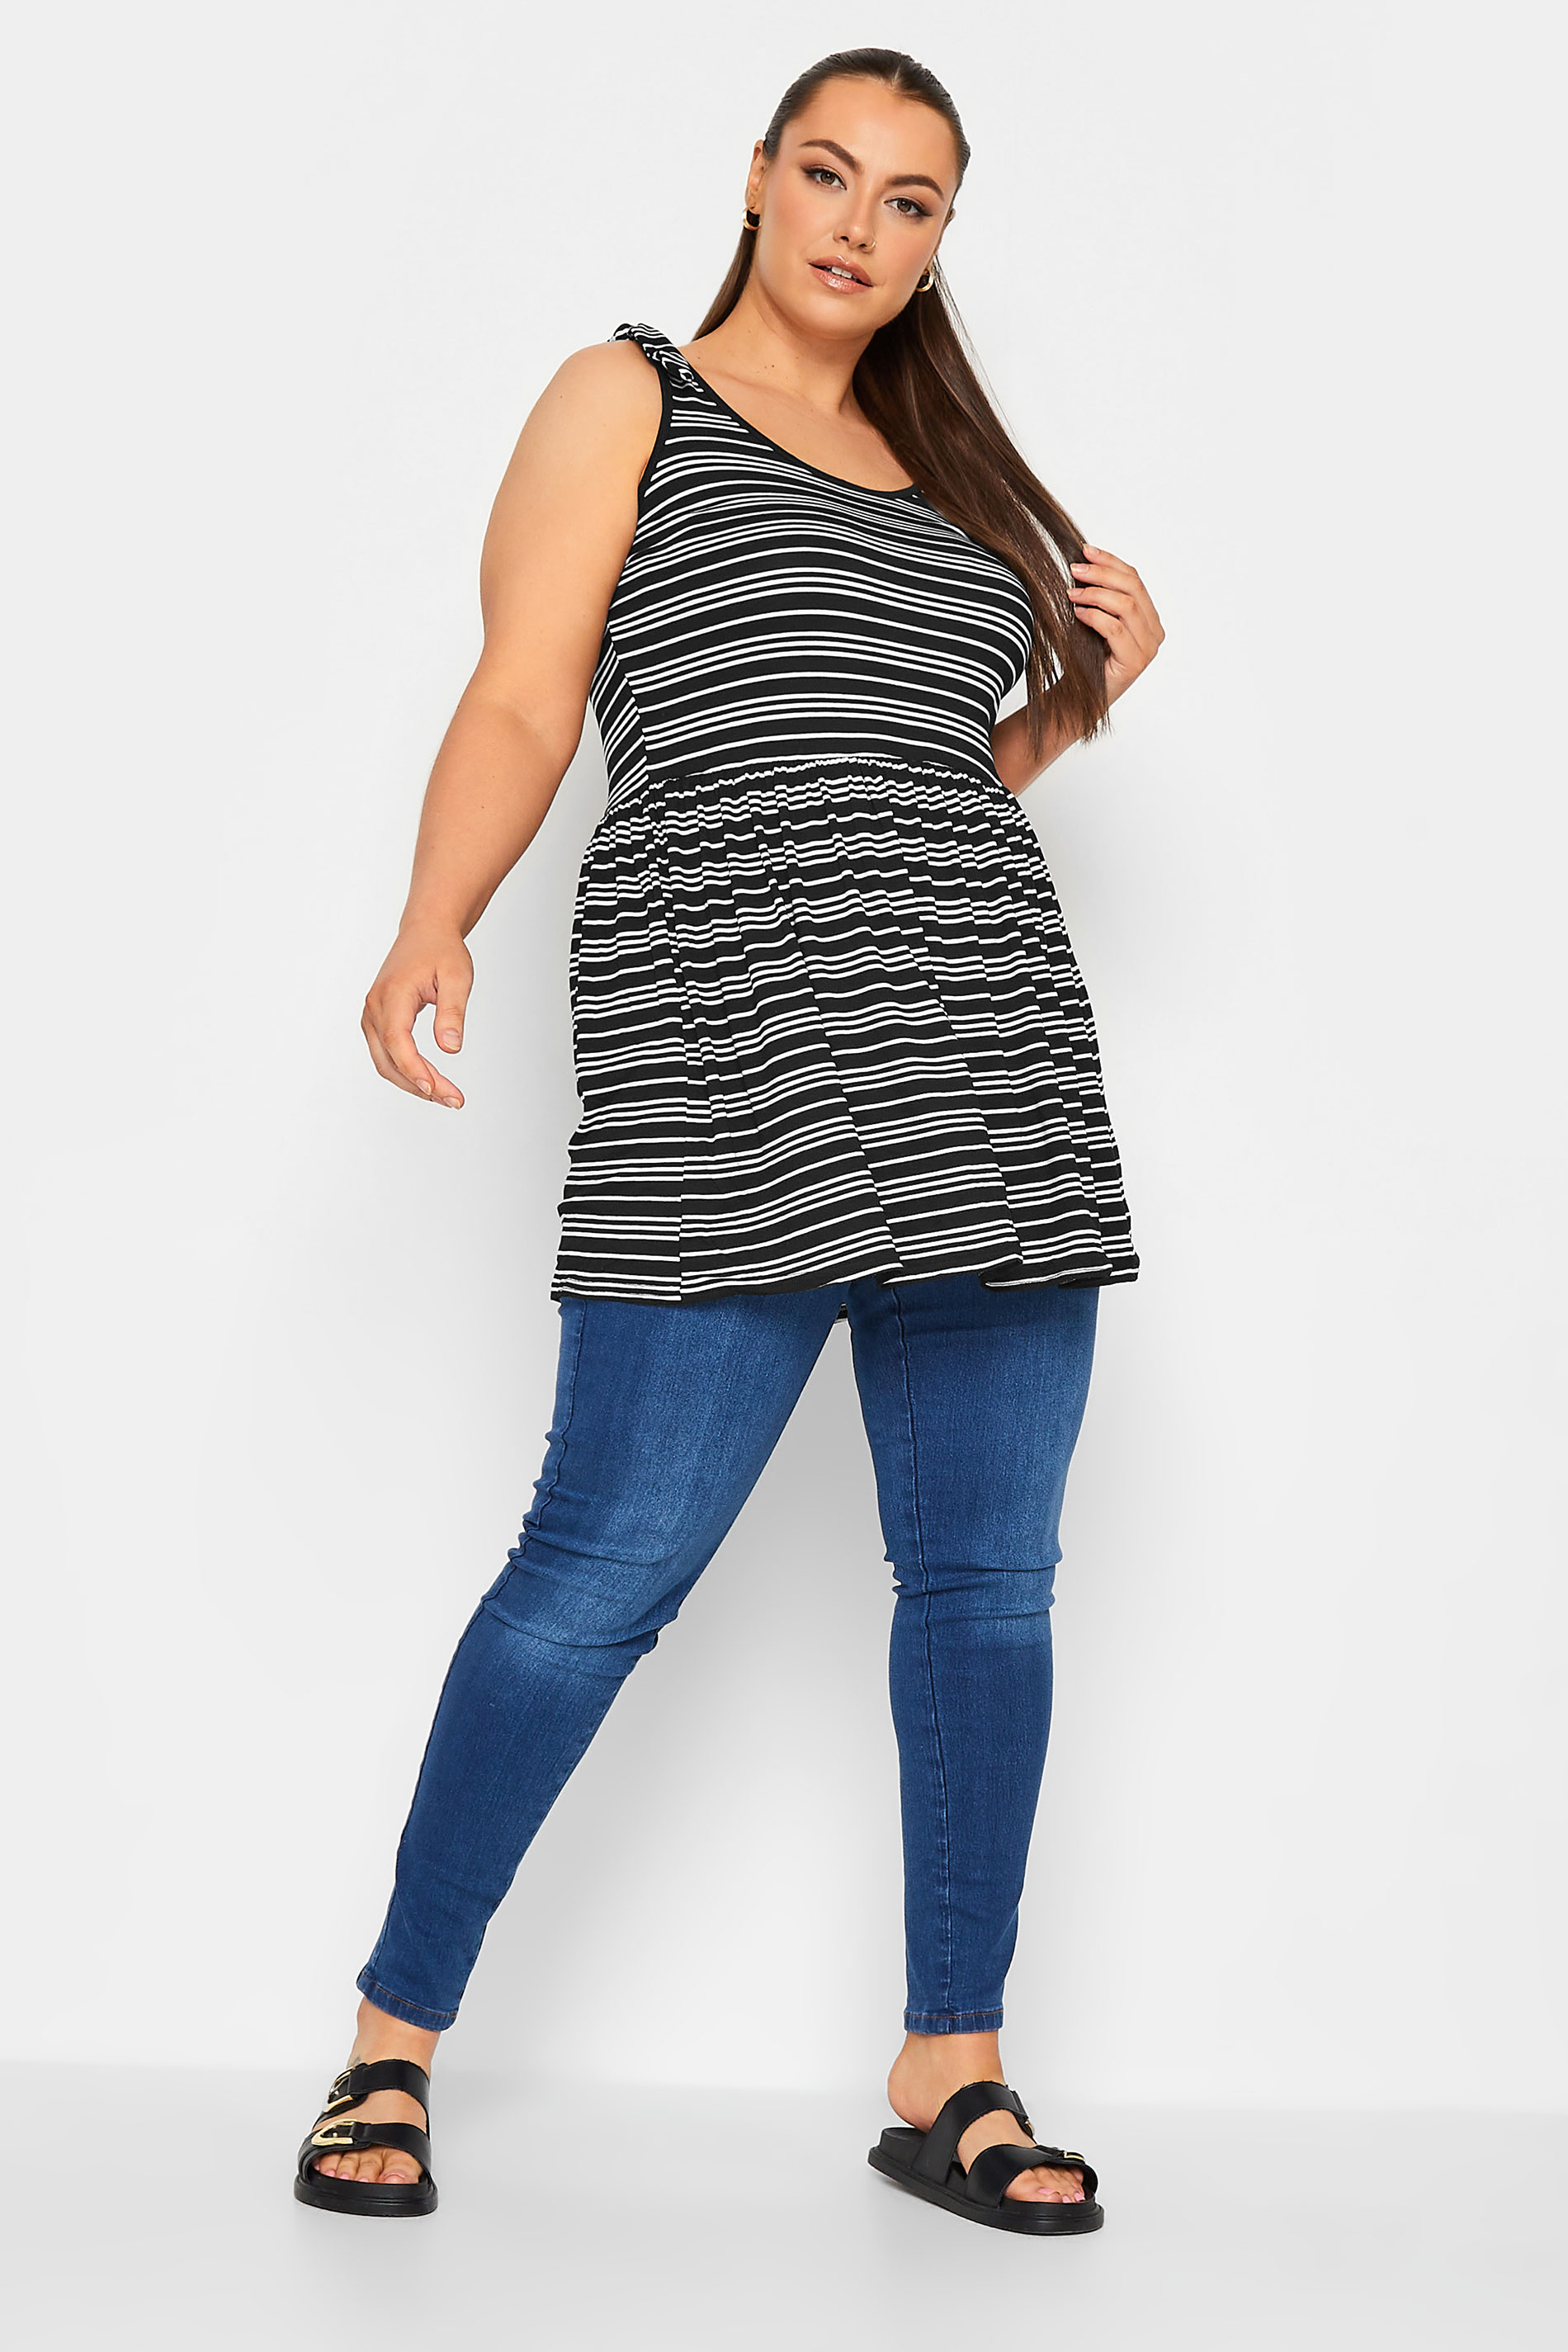 YOURS  Plus Size Black Stripe Tie Peplum Cami Top | Yours Clothing 2